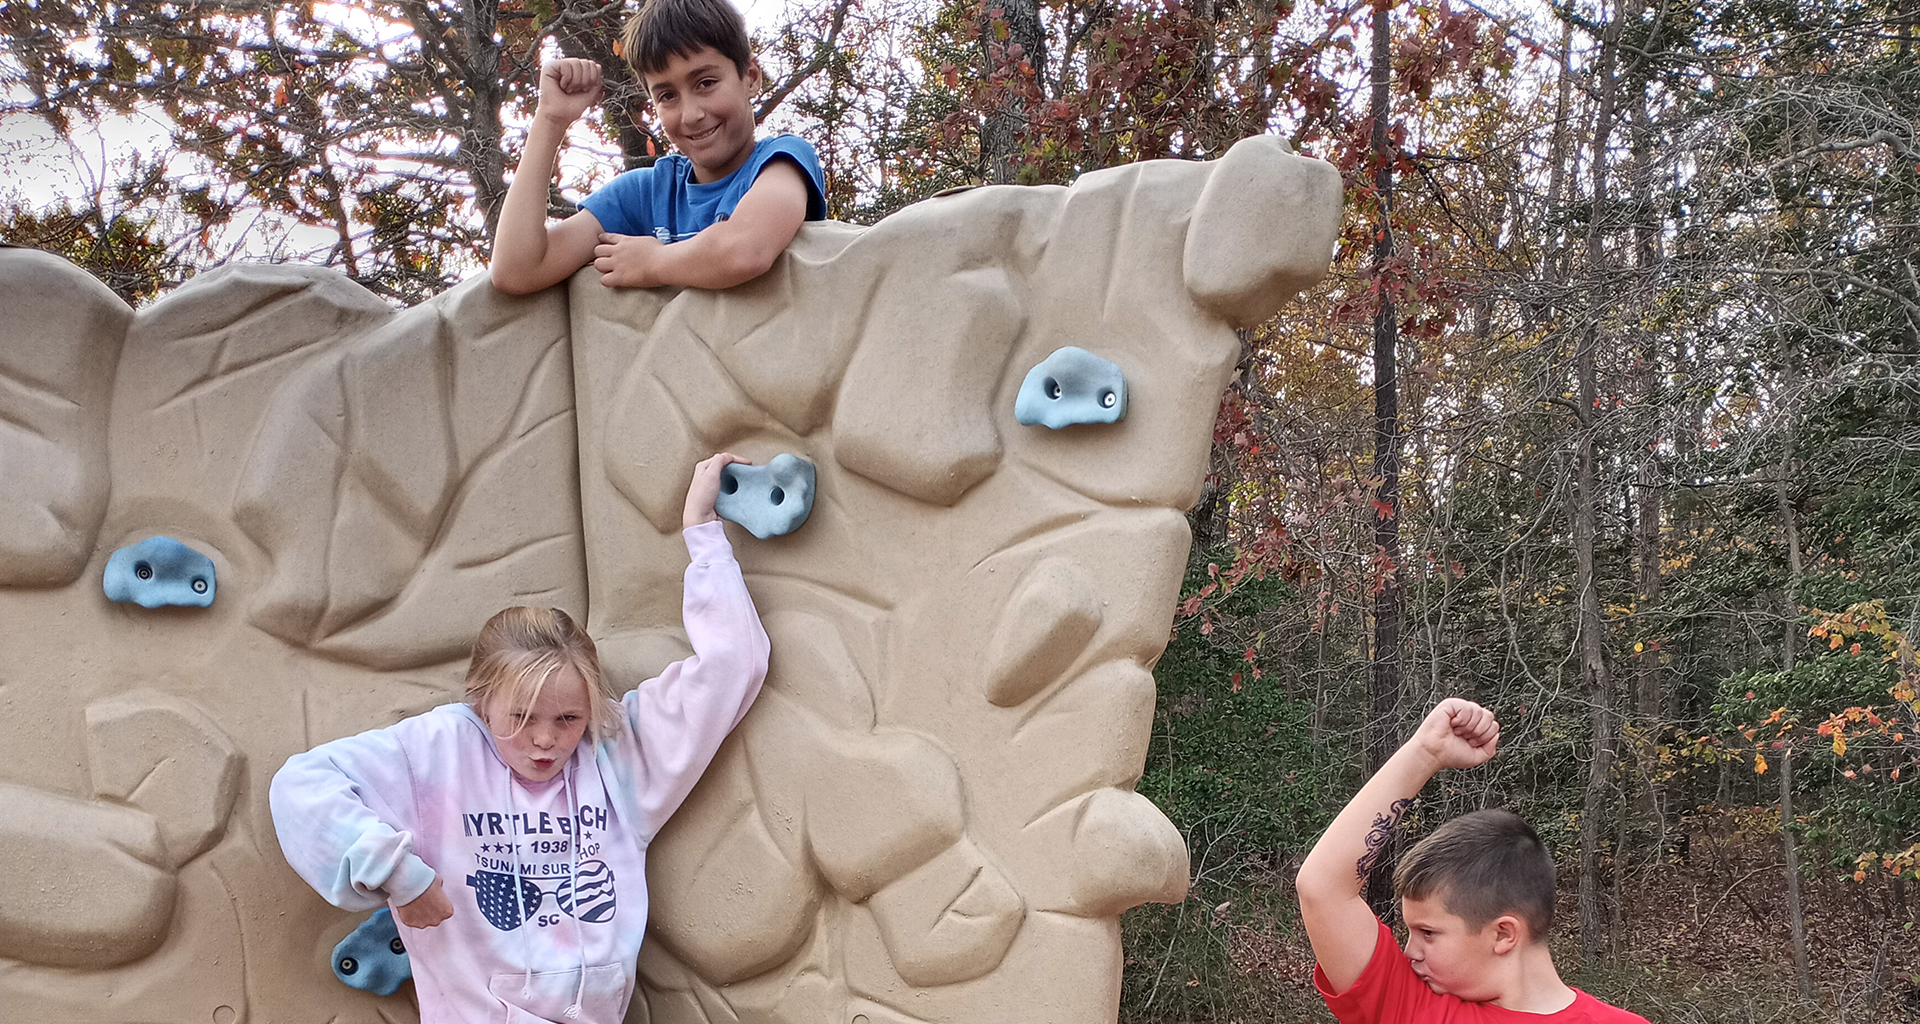 Three students acting silly on a climb wall.